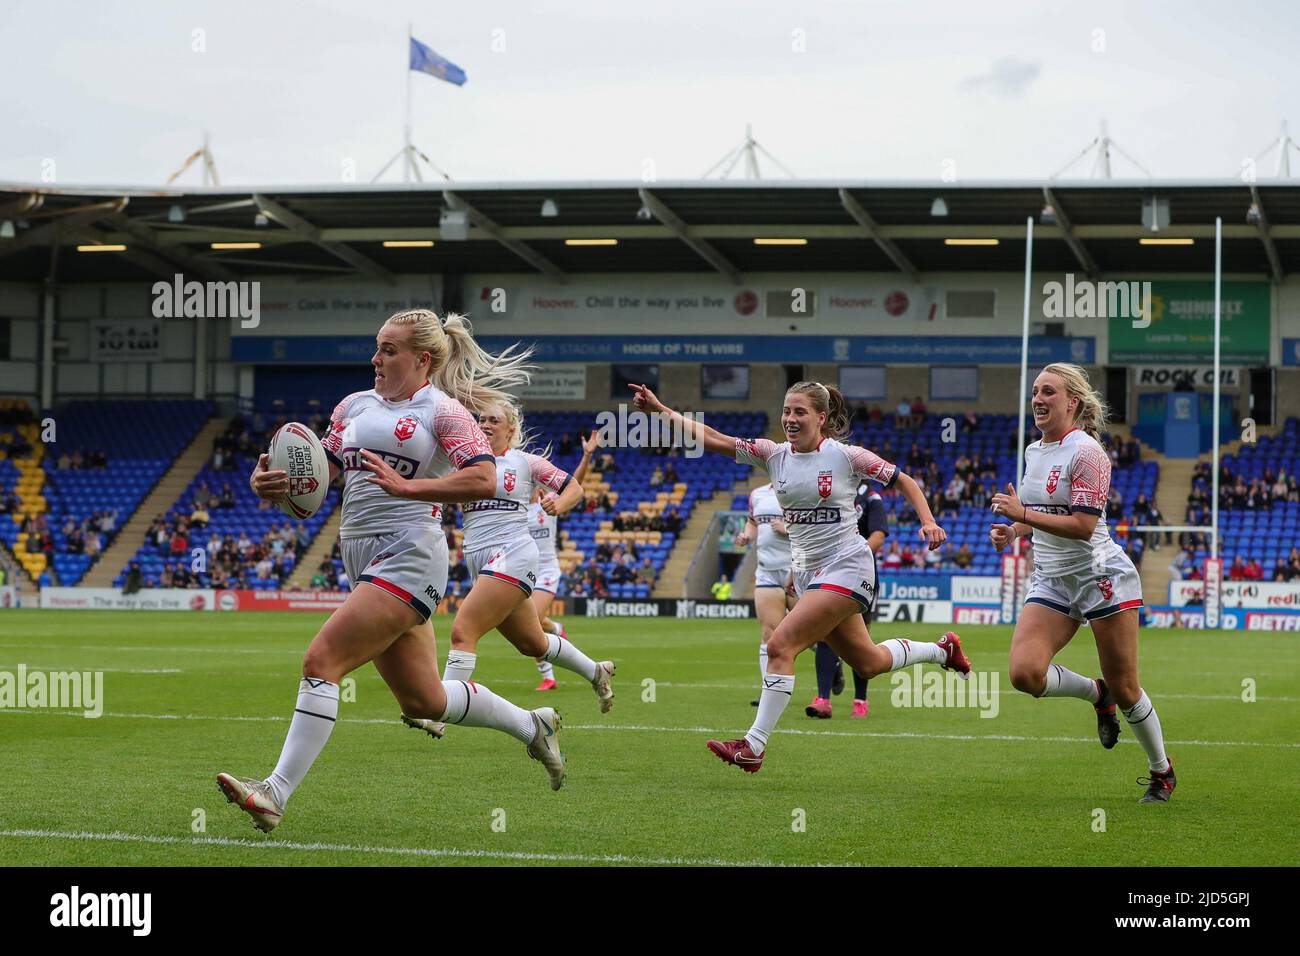 Warrington, UK. 18th June, 2022. Amy Hardcastle #4 of the England women national rugby league team breaks clear and goes on to score a try making it 14-0 in Warrington, United Kingdom on 6/18/2022. (Photo by James Heaton/News Images/Sipa USA) Credit: Sipa USA/Alamy Live News Stock Photo